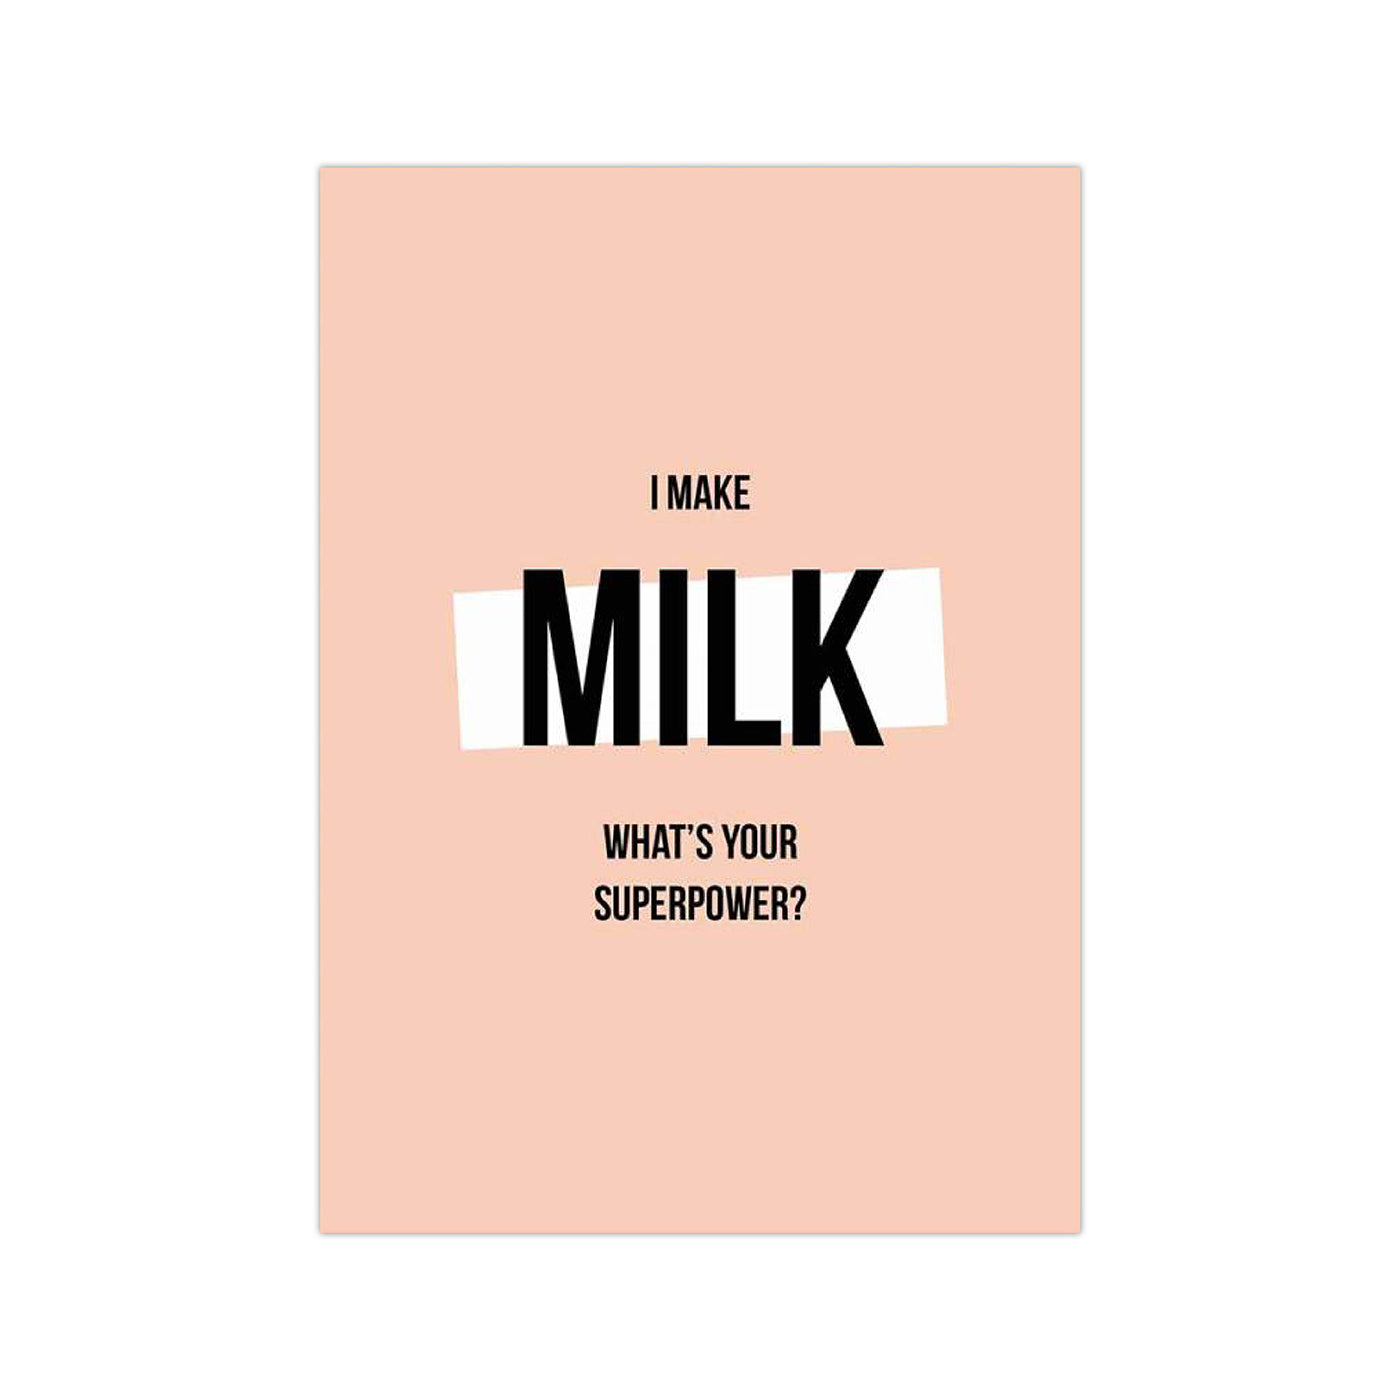 I make milk, what's your superpower?